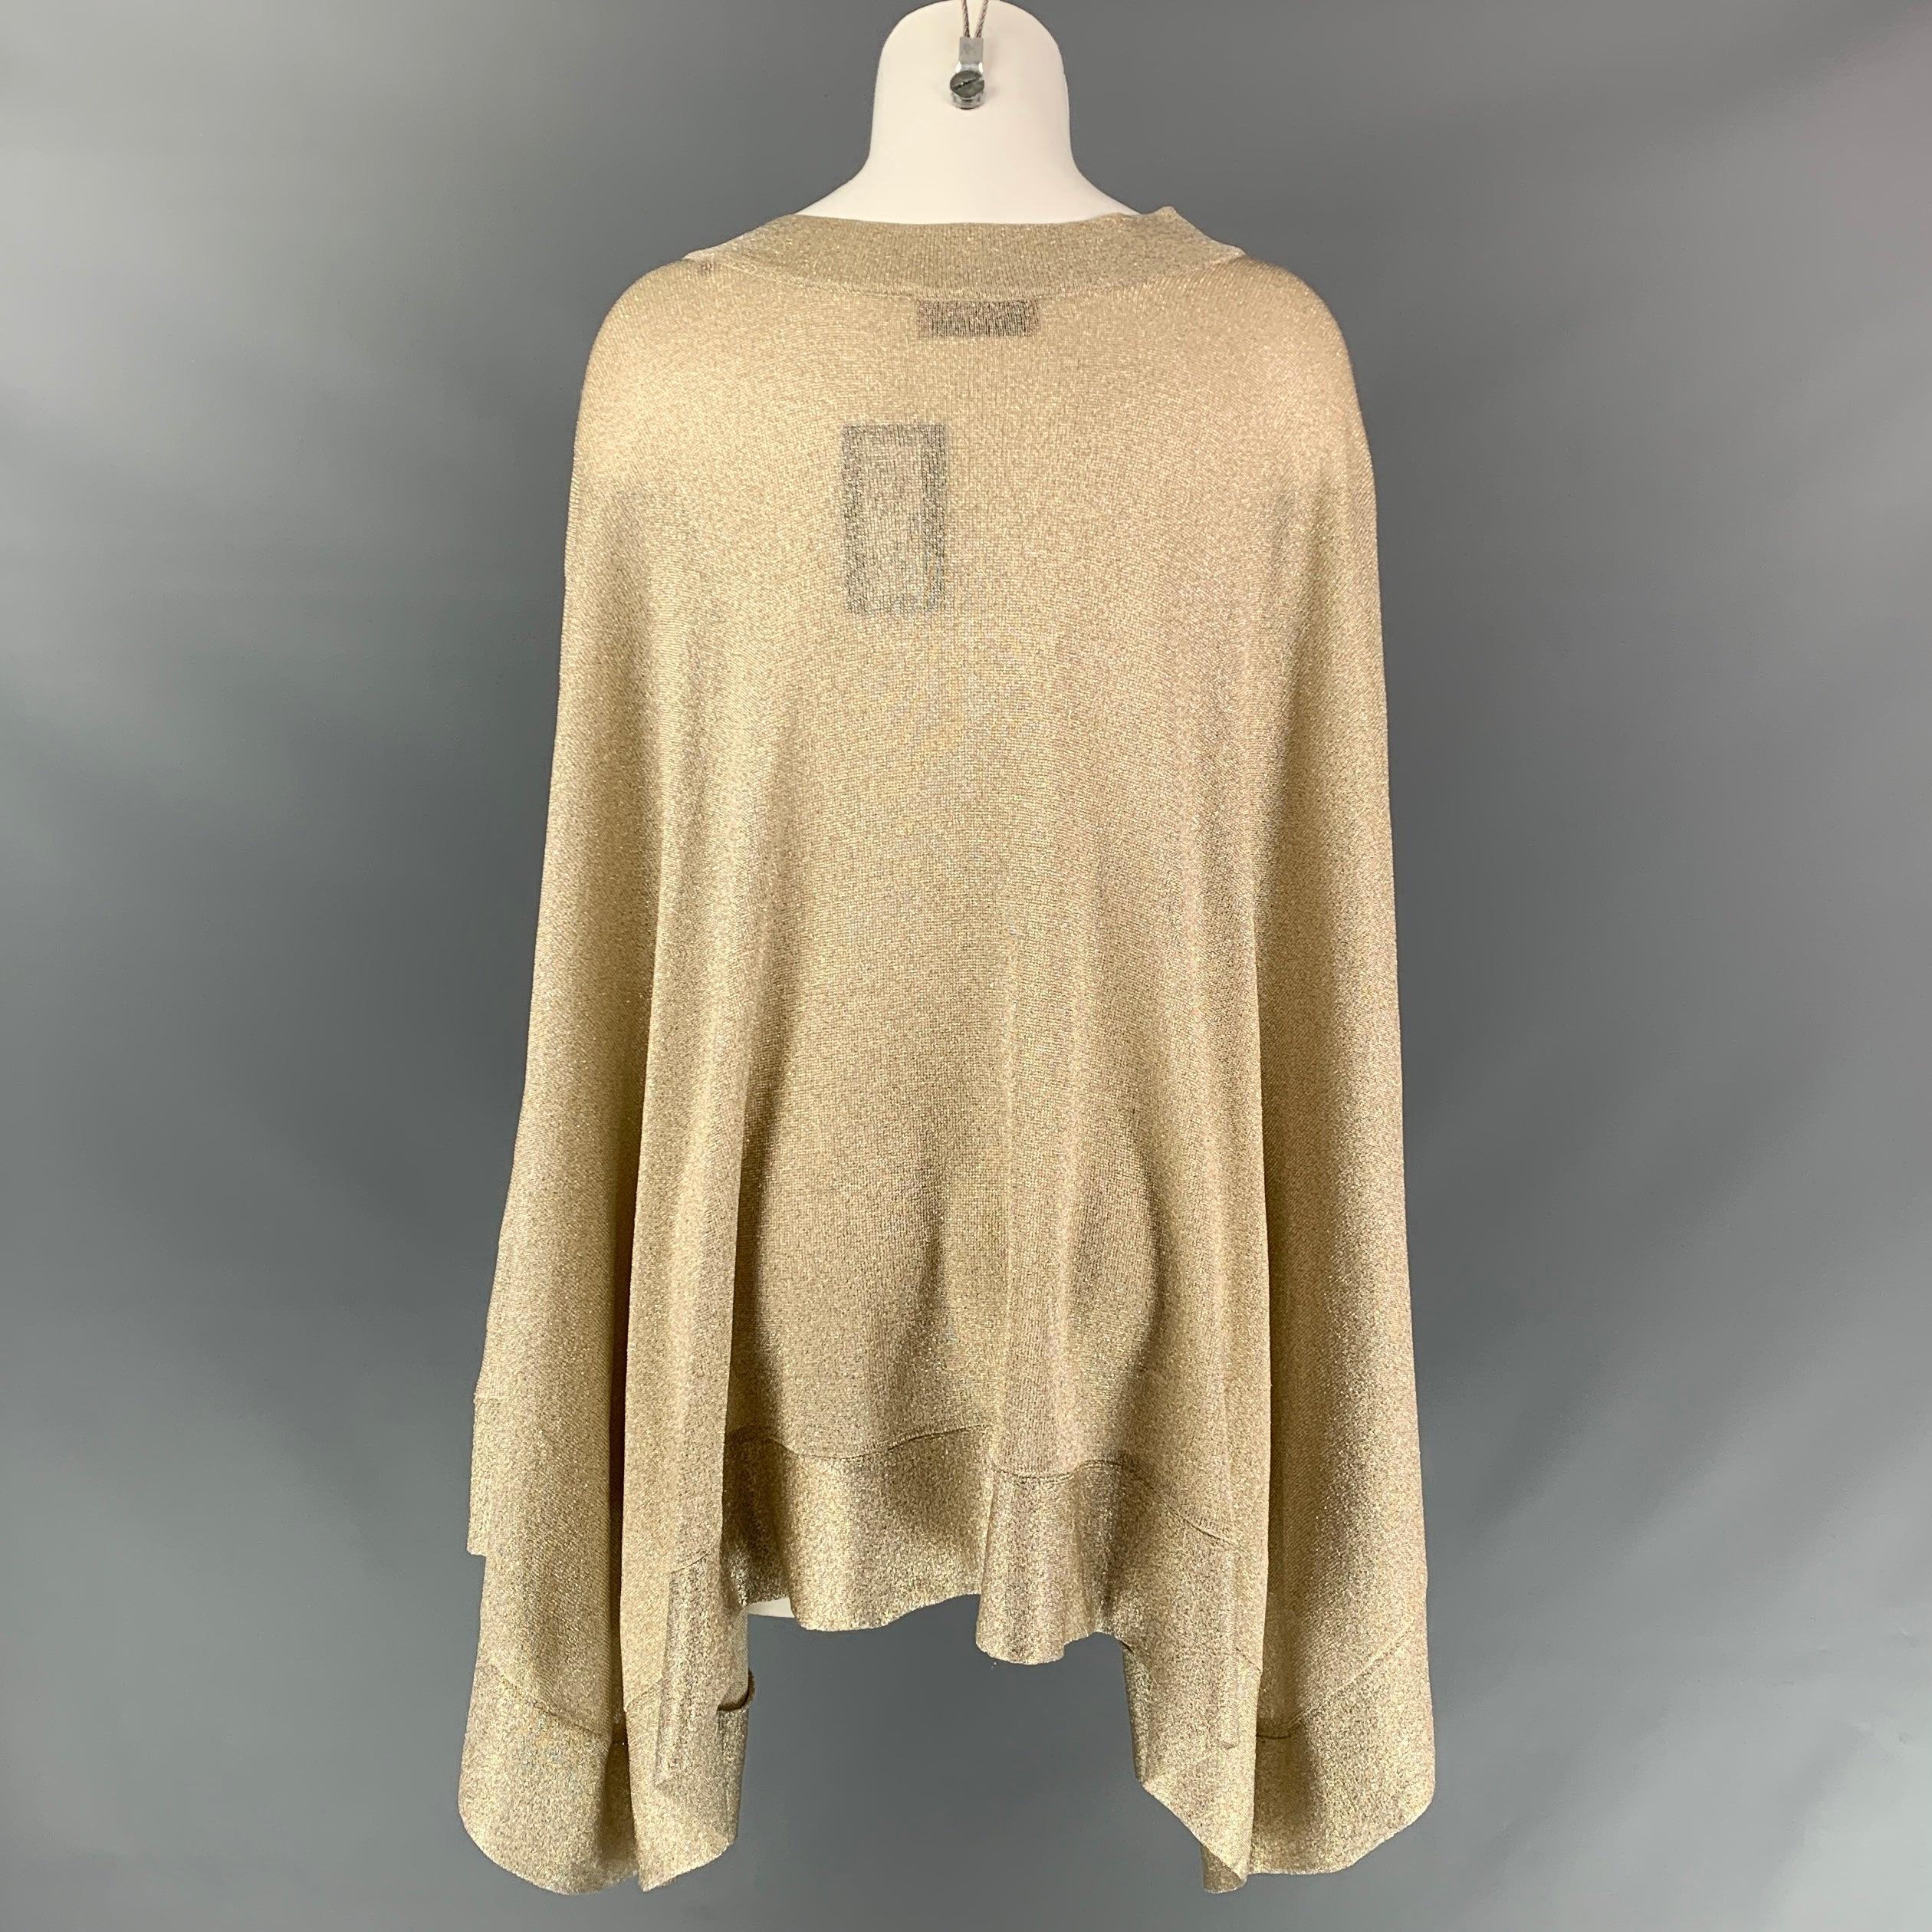 MISSONI Size 6 Gold Metallic Viscose Blend Poncho Sweater In Good Condition For Sale In San Francisco, CA